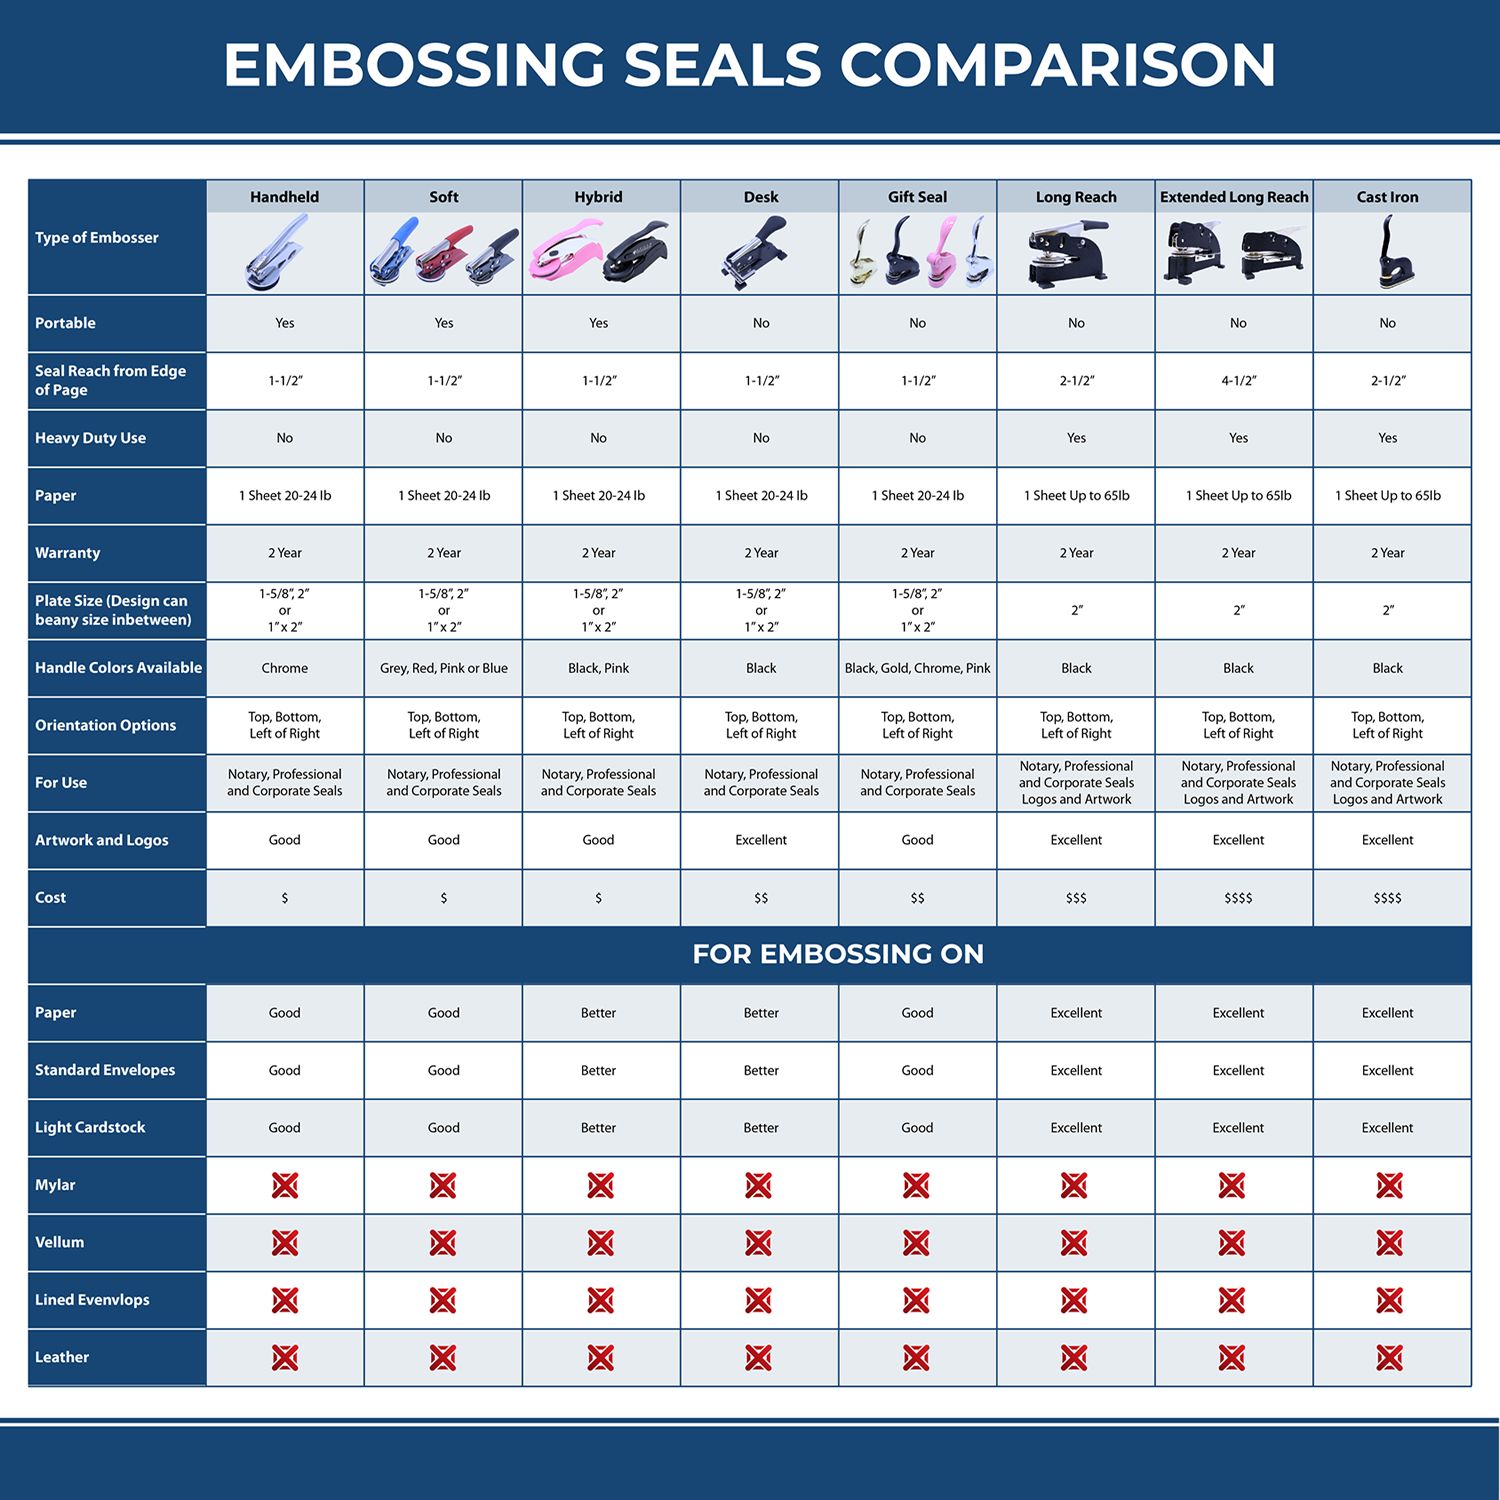 A comparison chart for the different types of mount models available for the State of Connecticut Extended Long Reach Landscape Architect Seal Embosser.